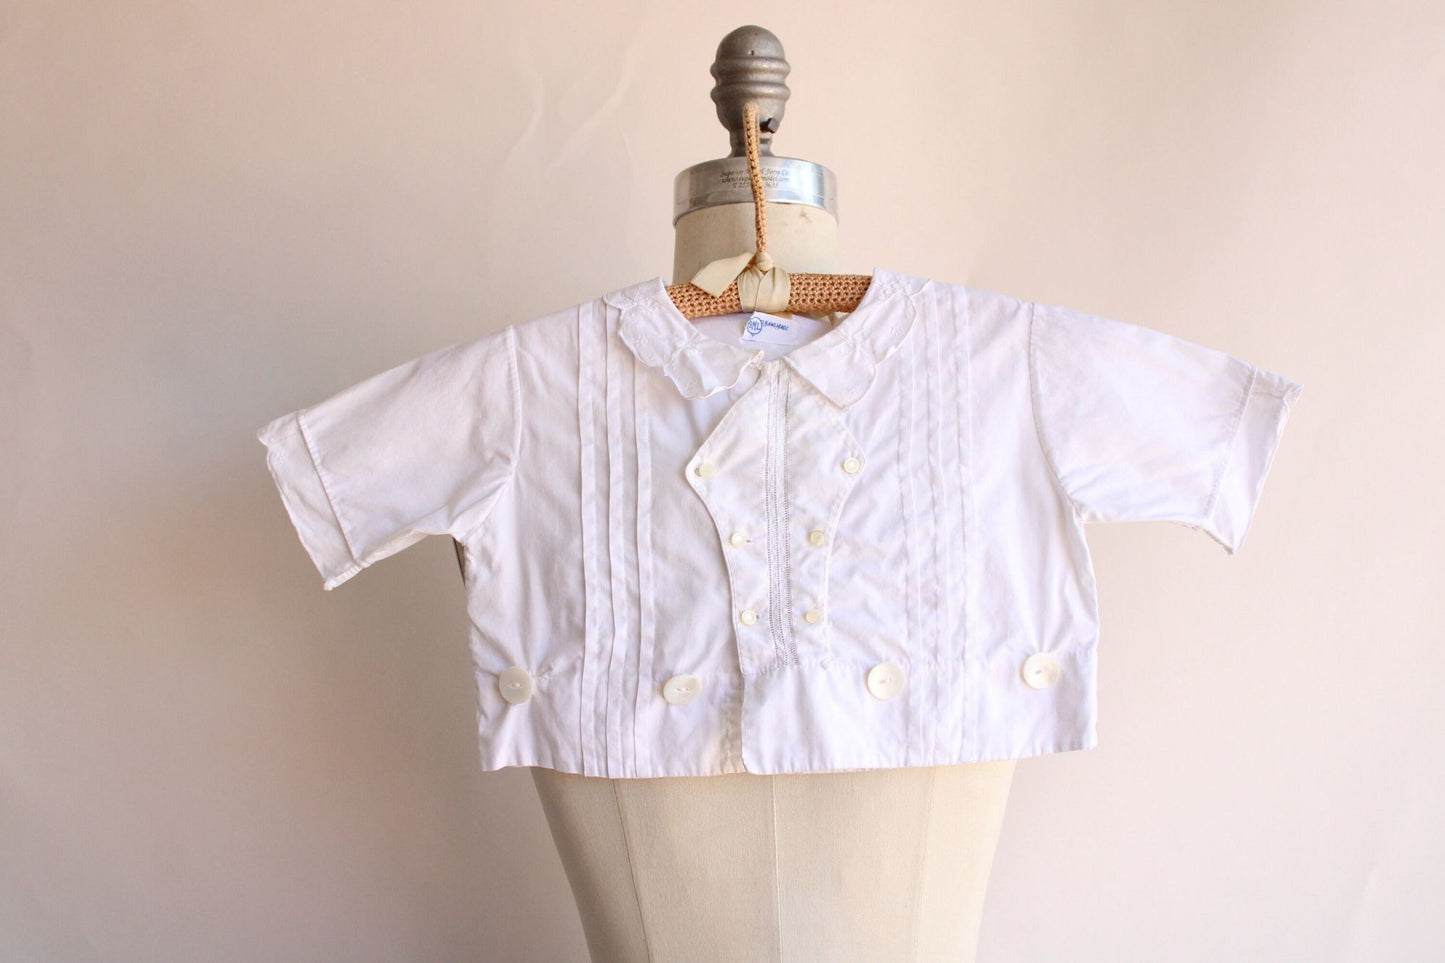 Vintage 1940s 1950s Baby Jacket in White Cotton with Embroidered Peter Pan Collar